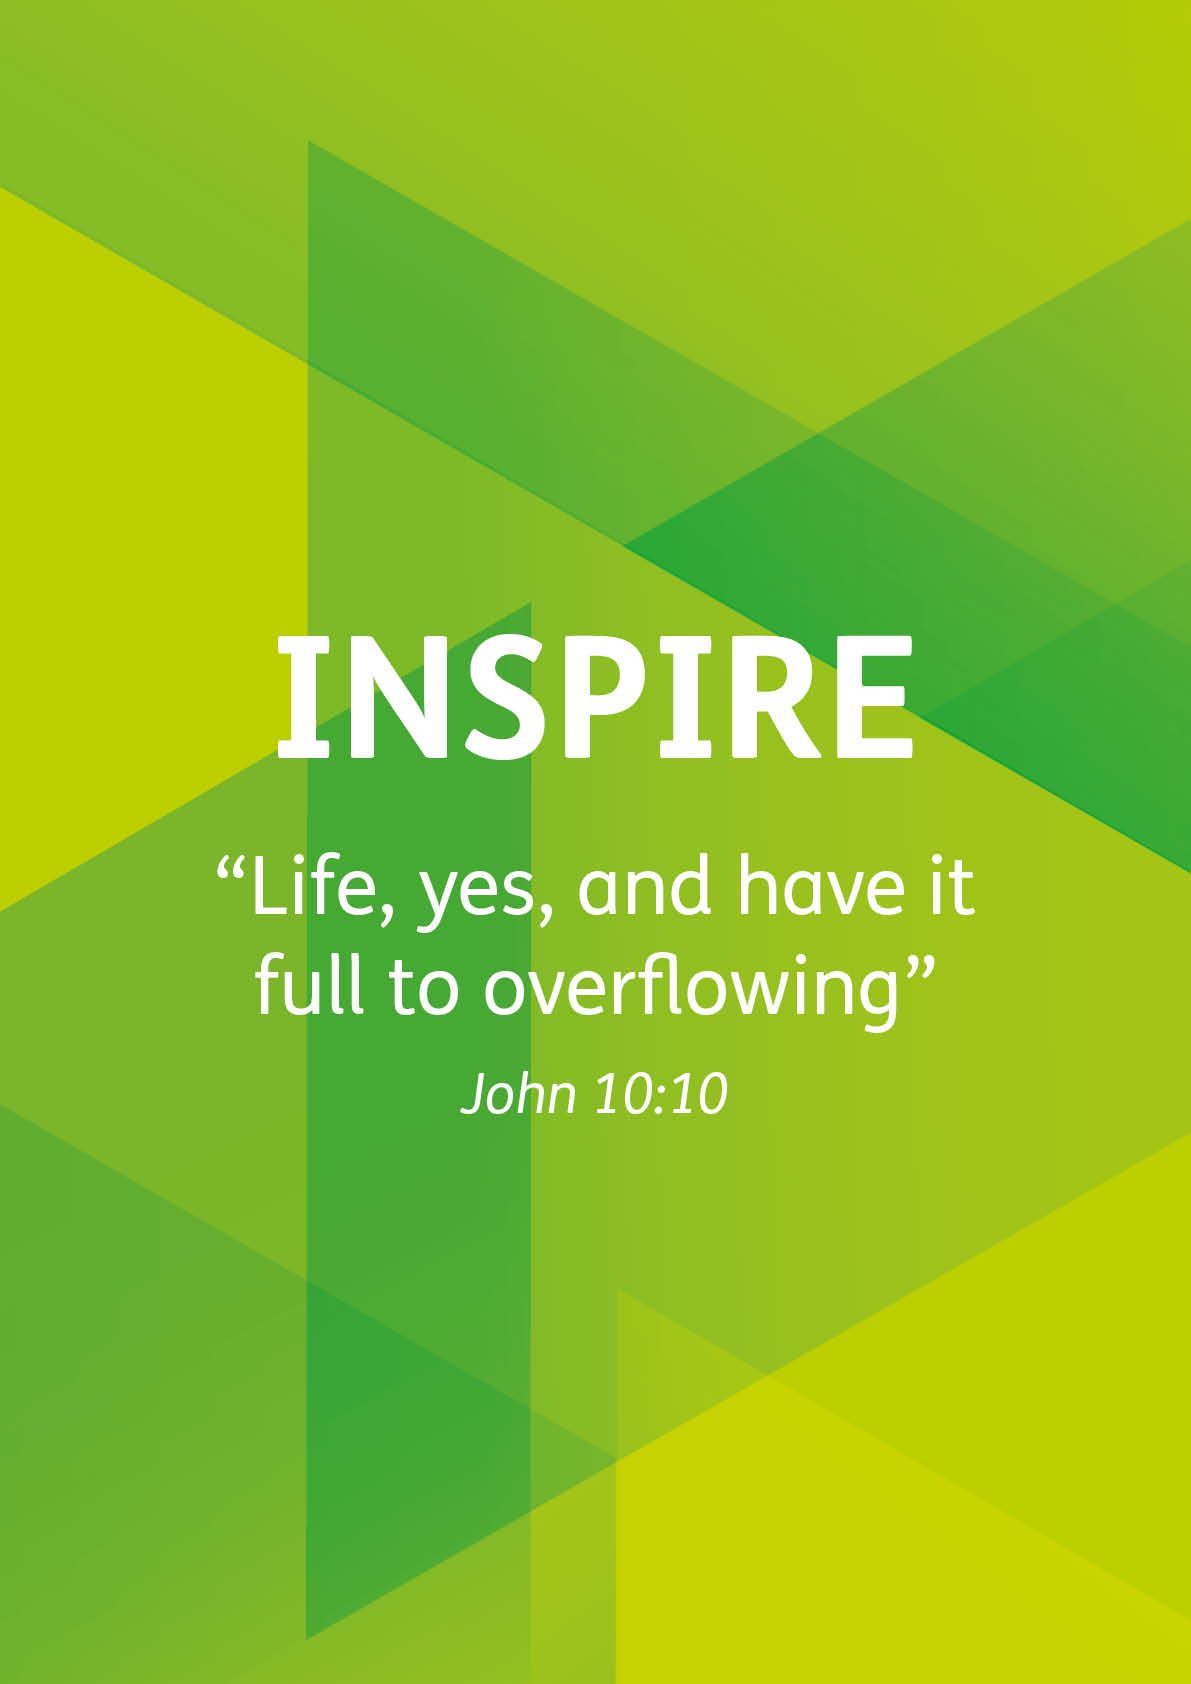 Inspire. “Life, yes, and have it full to overflowing” John 10:10